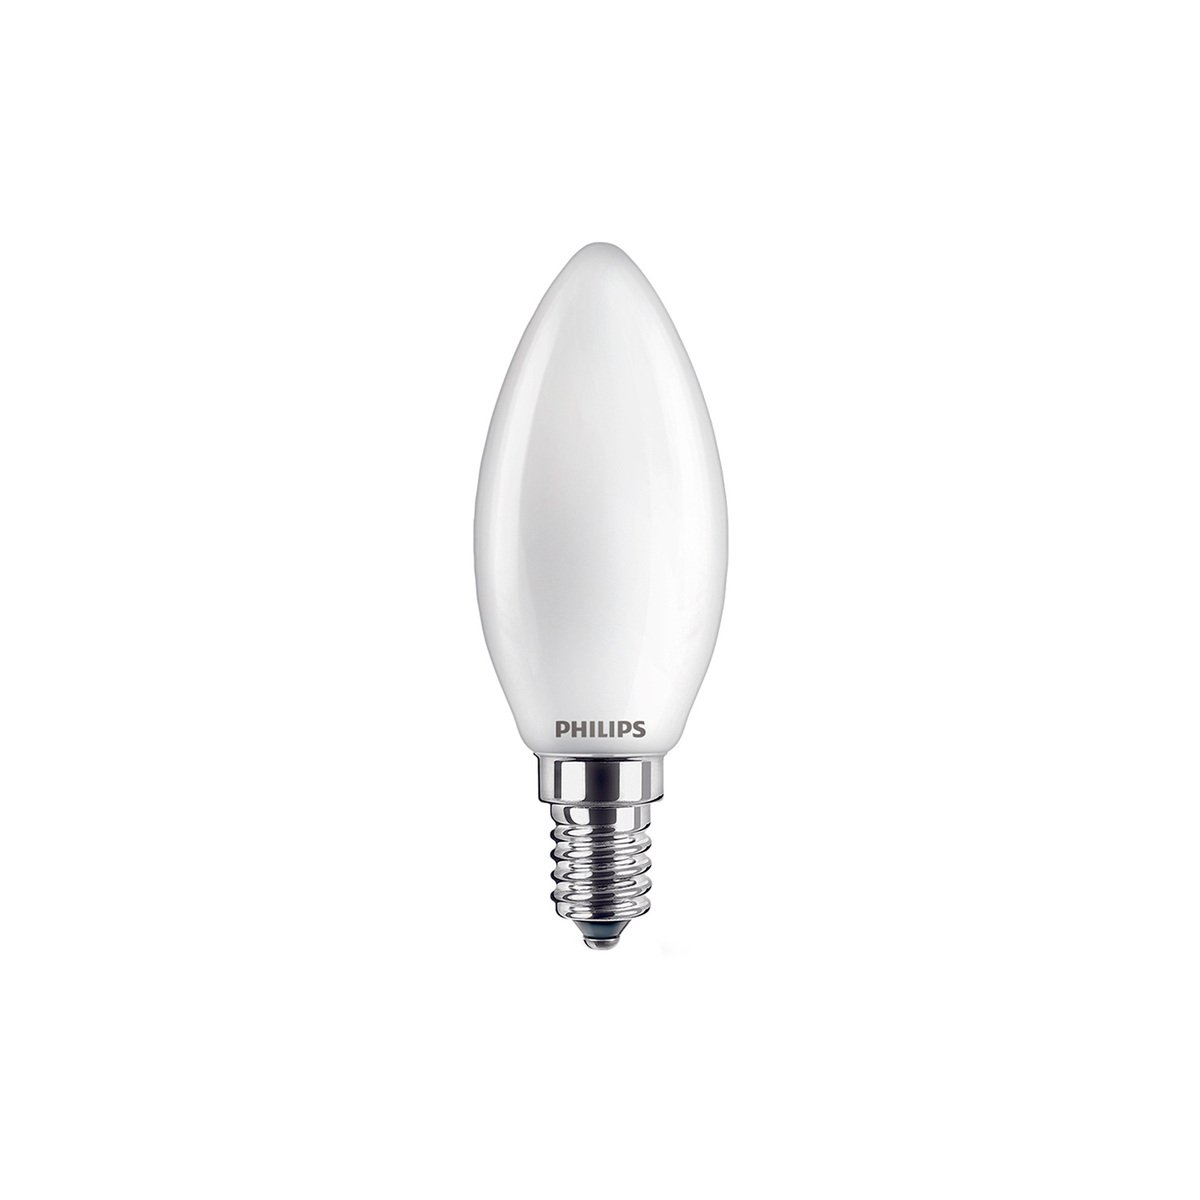 Nuura Philips LED bulb 4,5W 470lm, dimmable | Finnish Shop